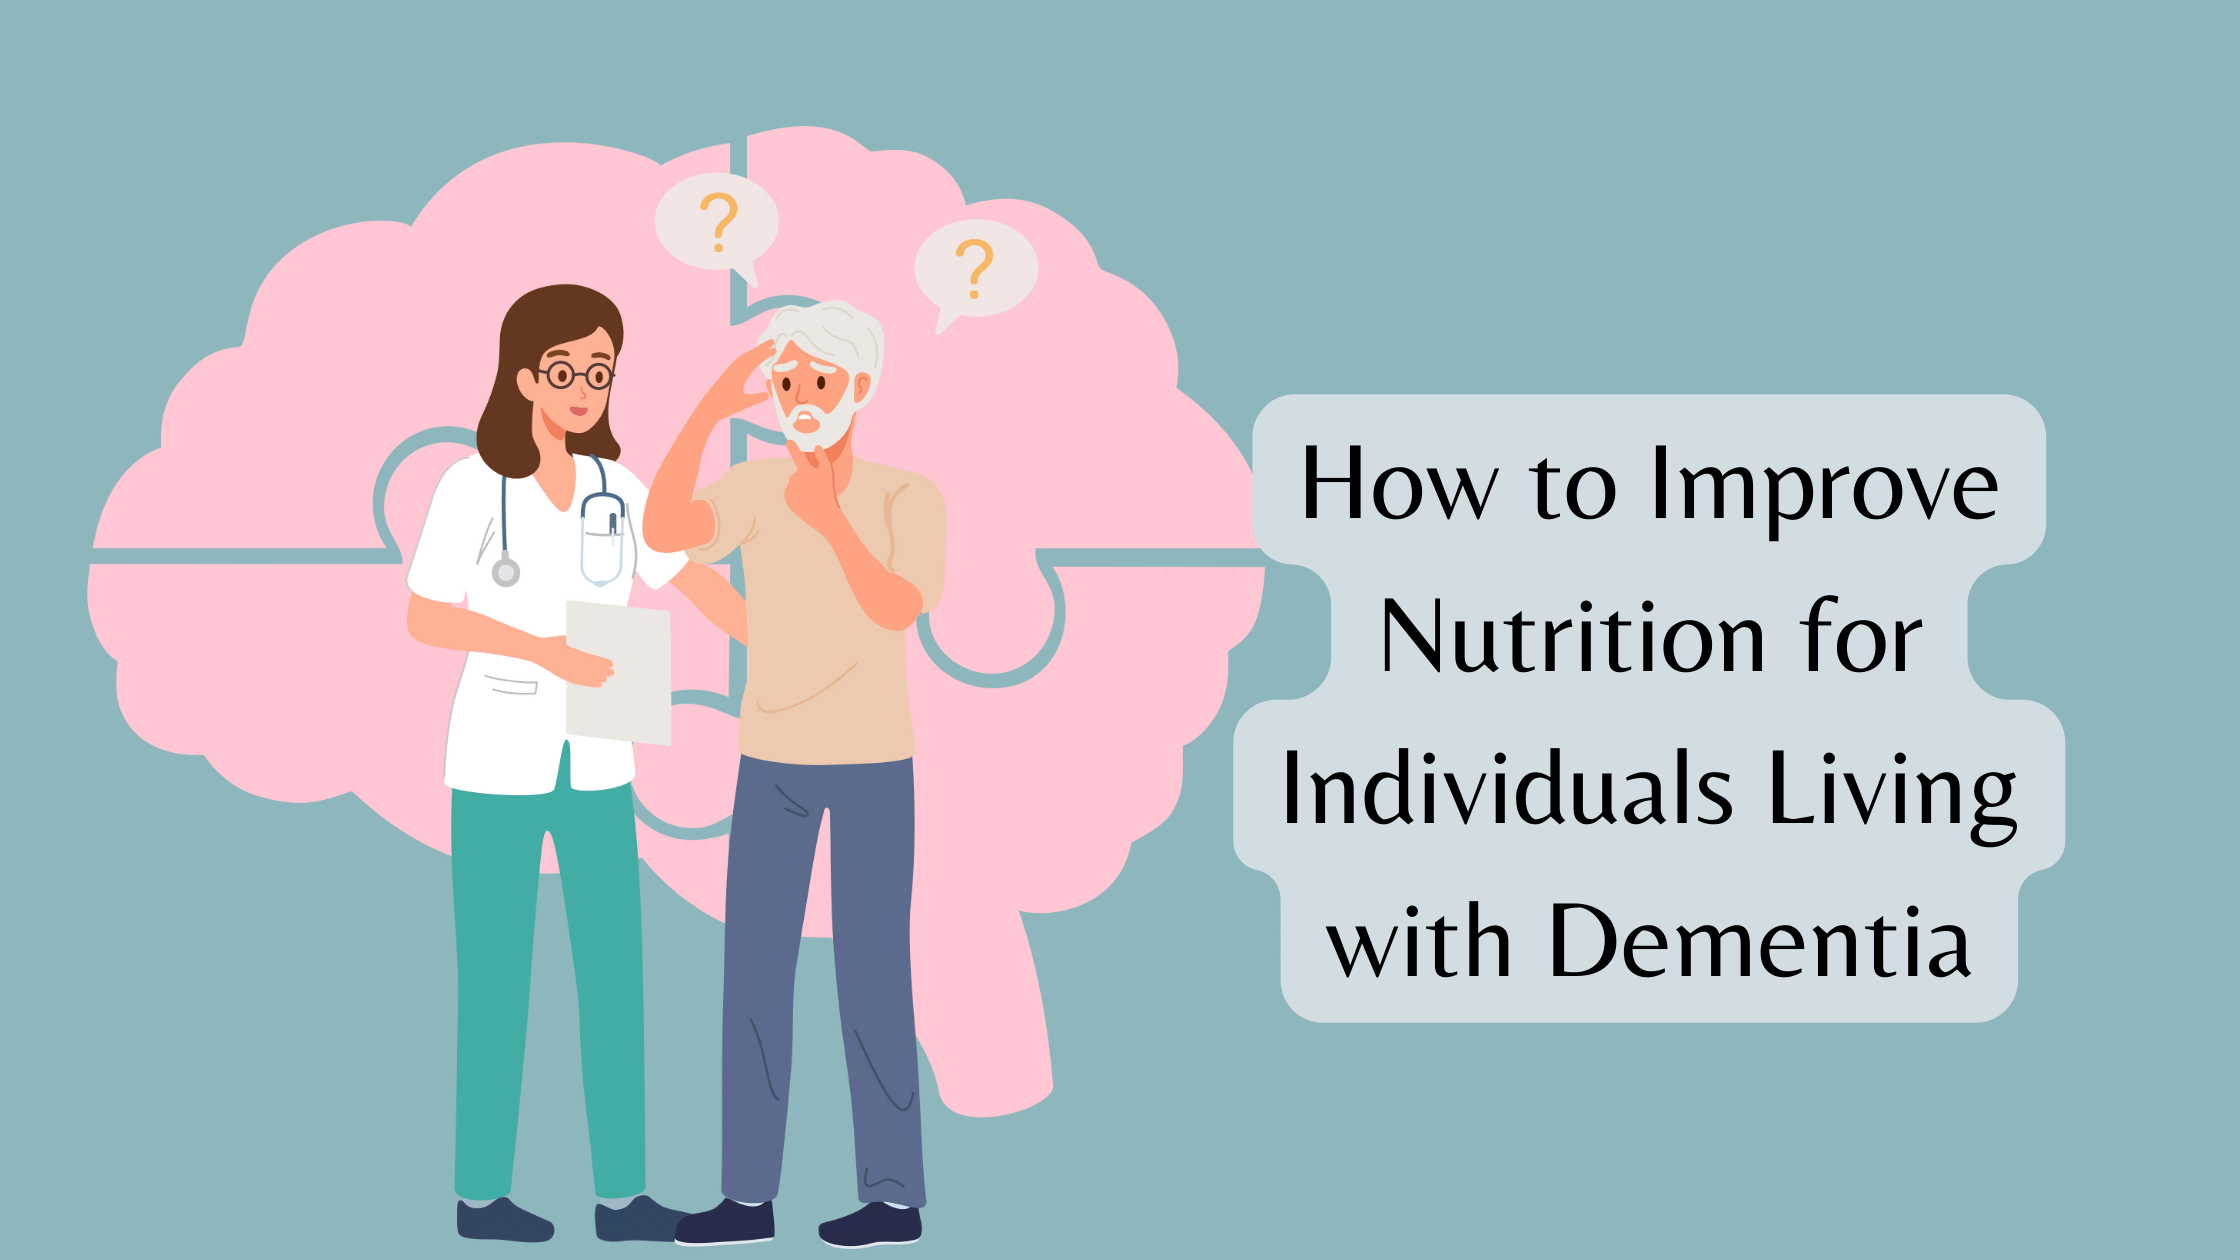 Improve Nutrition for Individuals Living with Dementia